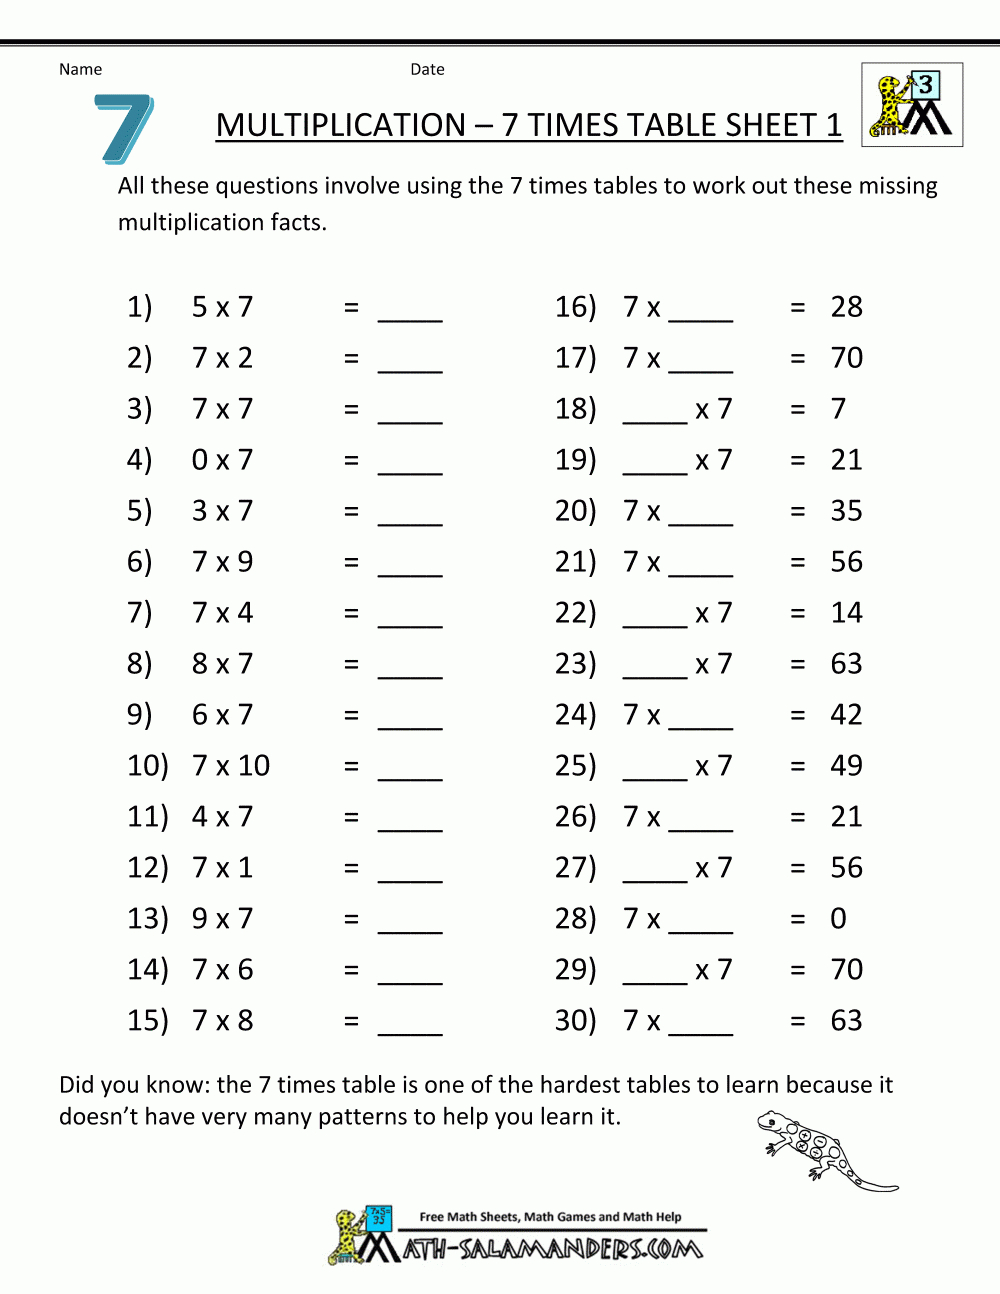 Multiplication Drill Sheets 7 Times Table 1 | Kids Math - Free Printable Math Worksheets Multiplication Facts